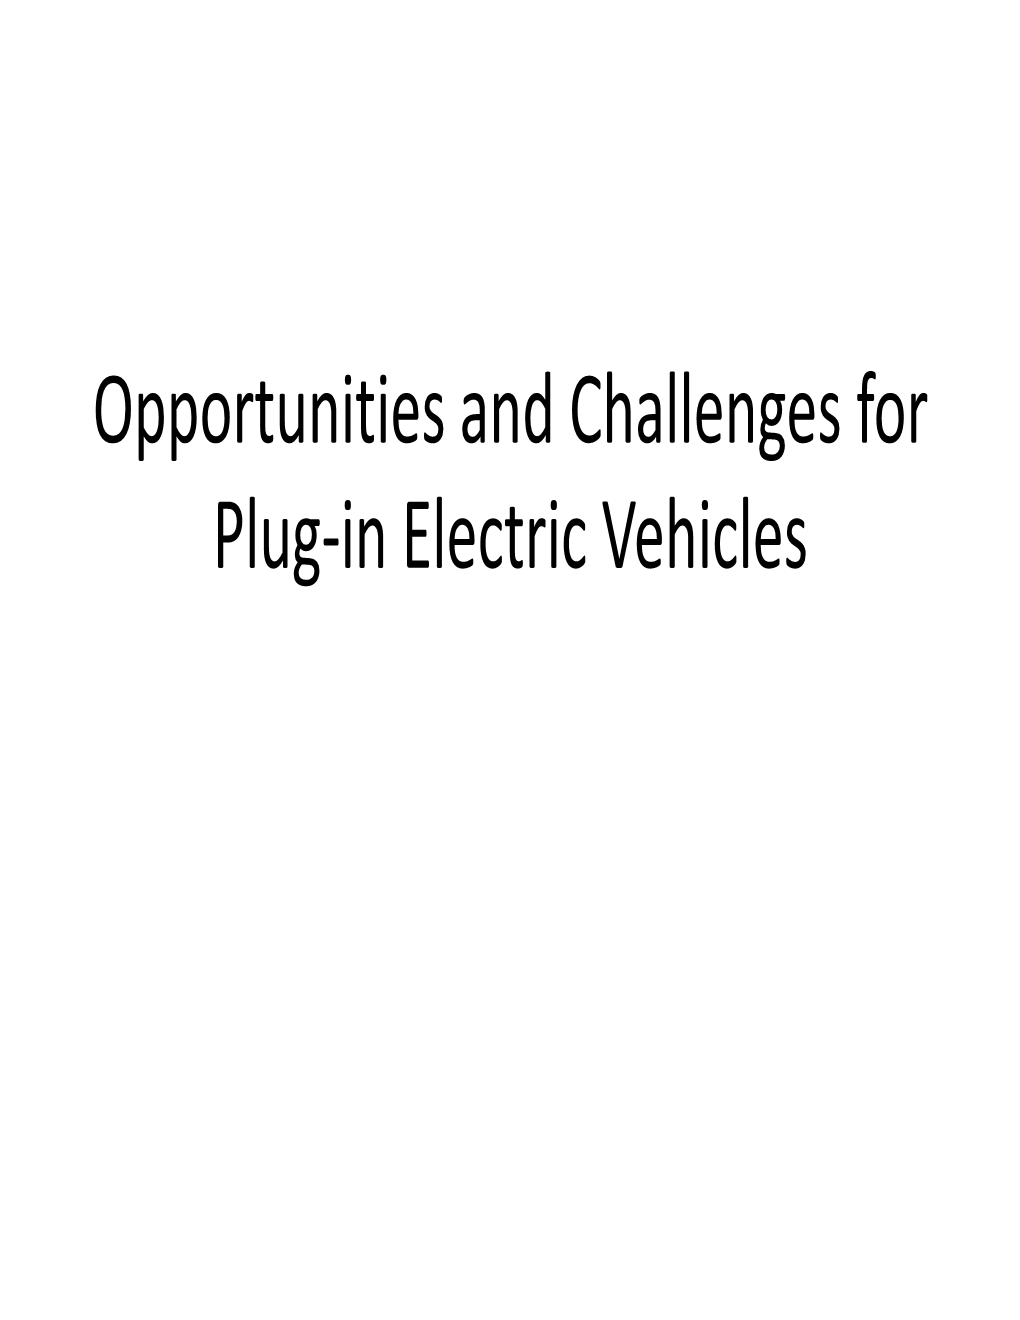 Opportunities and Challenges for Plug-In Electric Vehicles